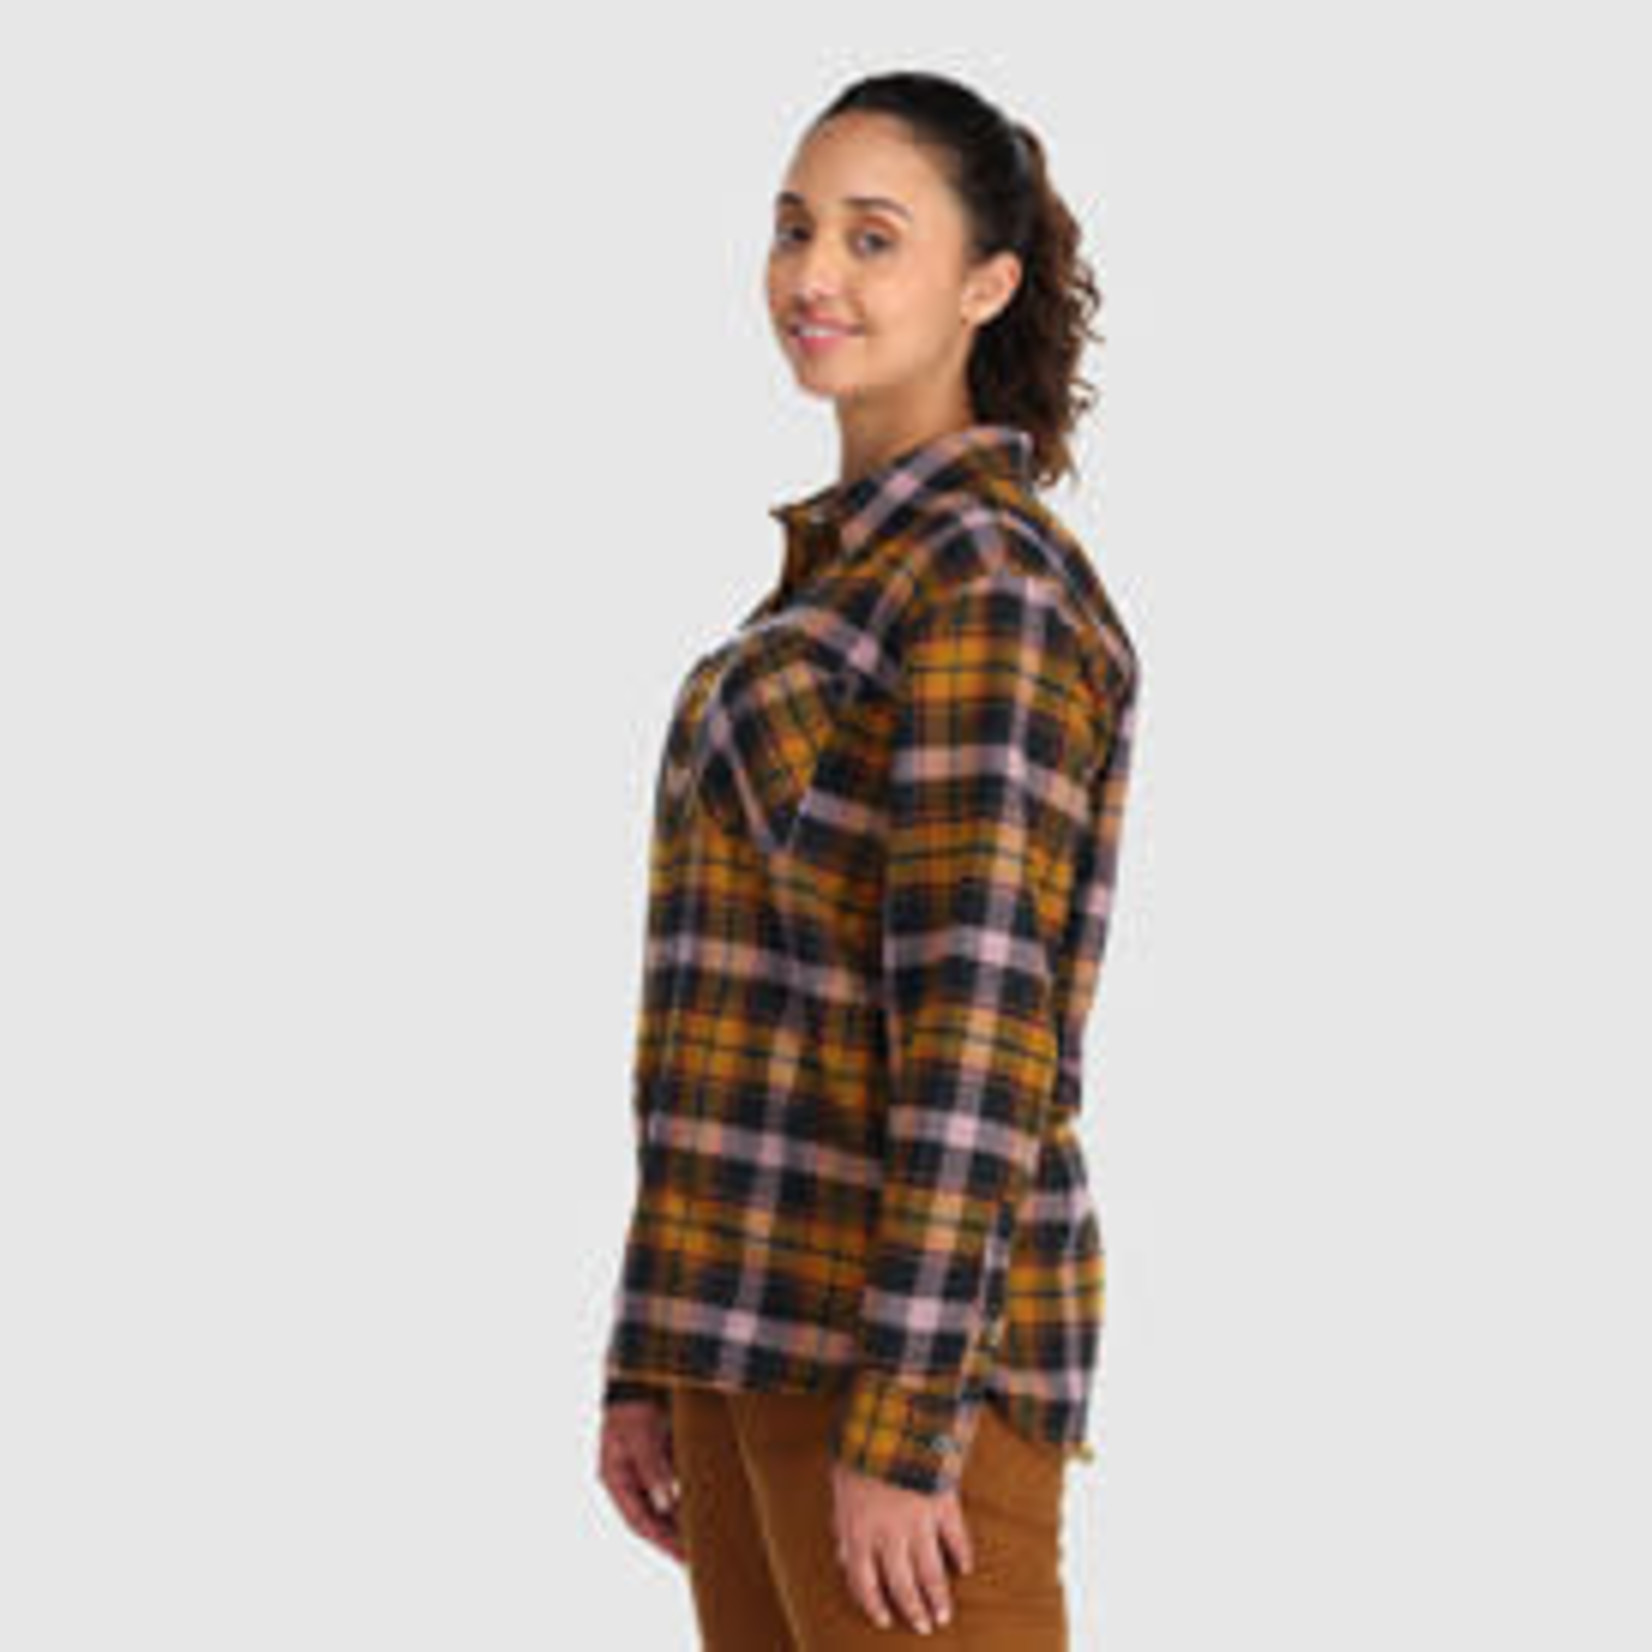 Outdoor Research Feedback Flannel Shirt W's